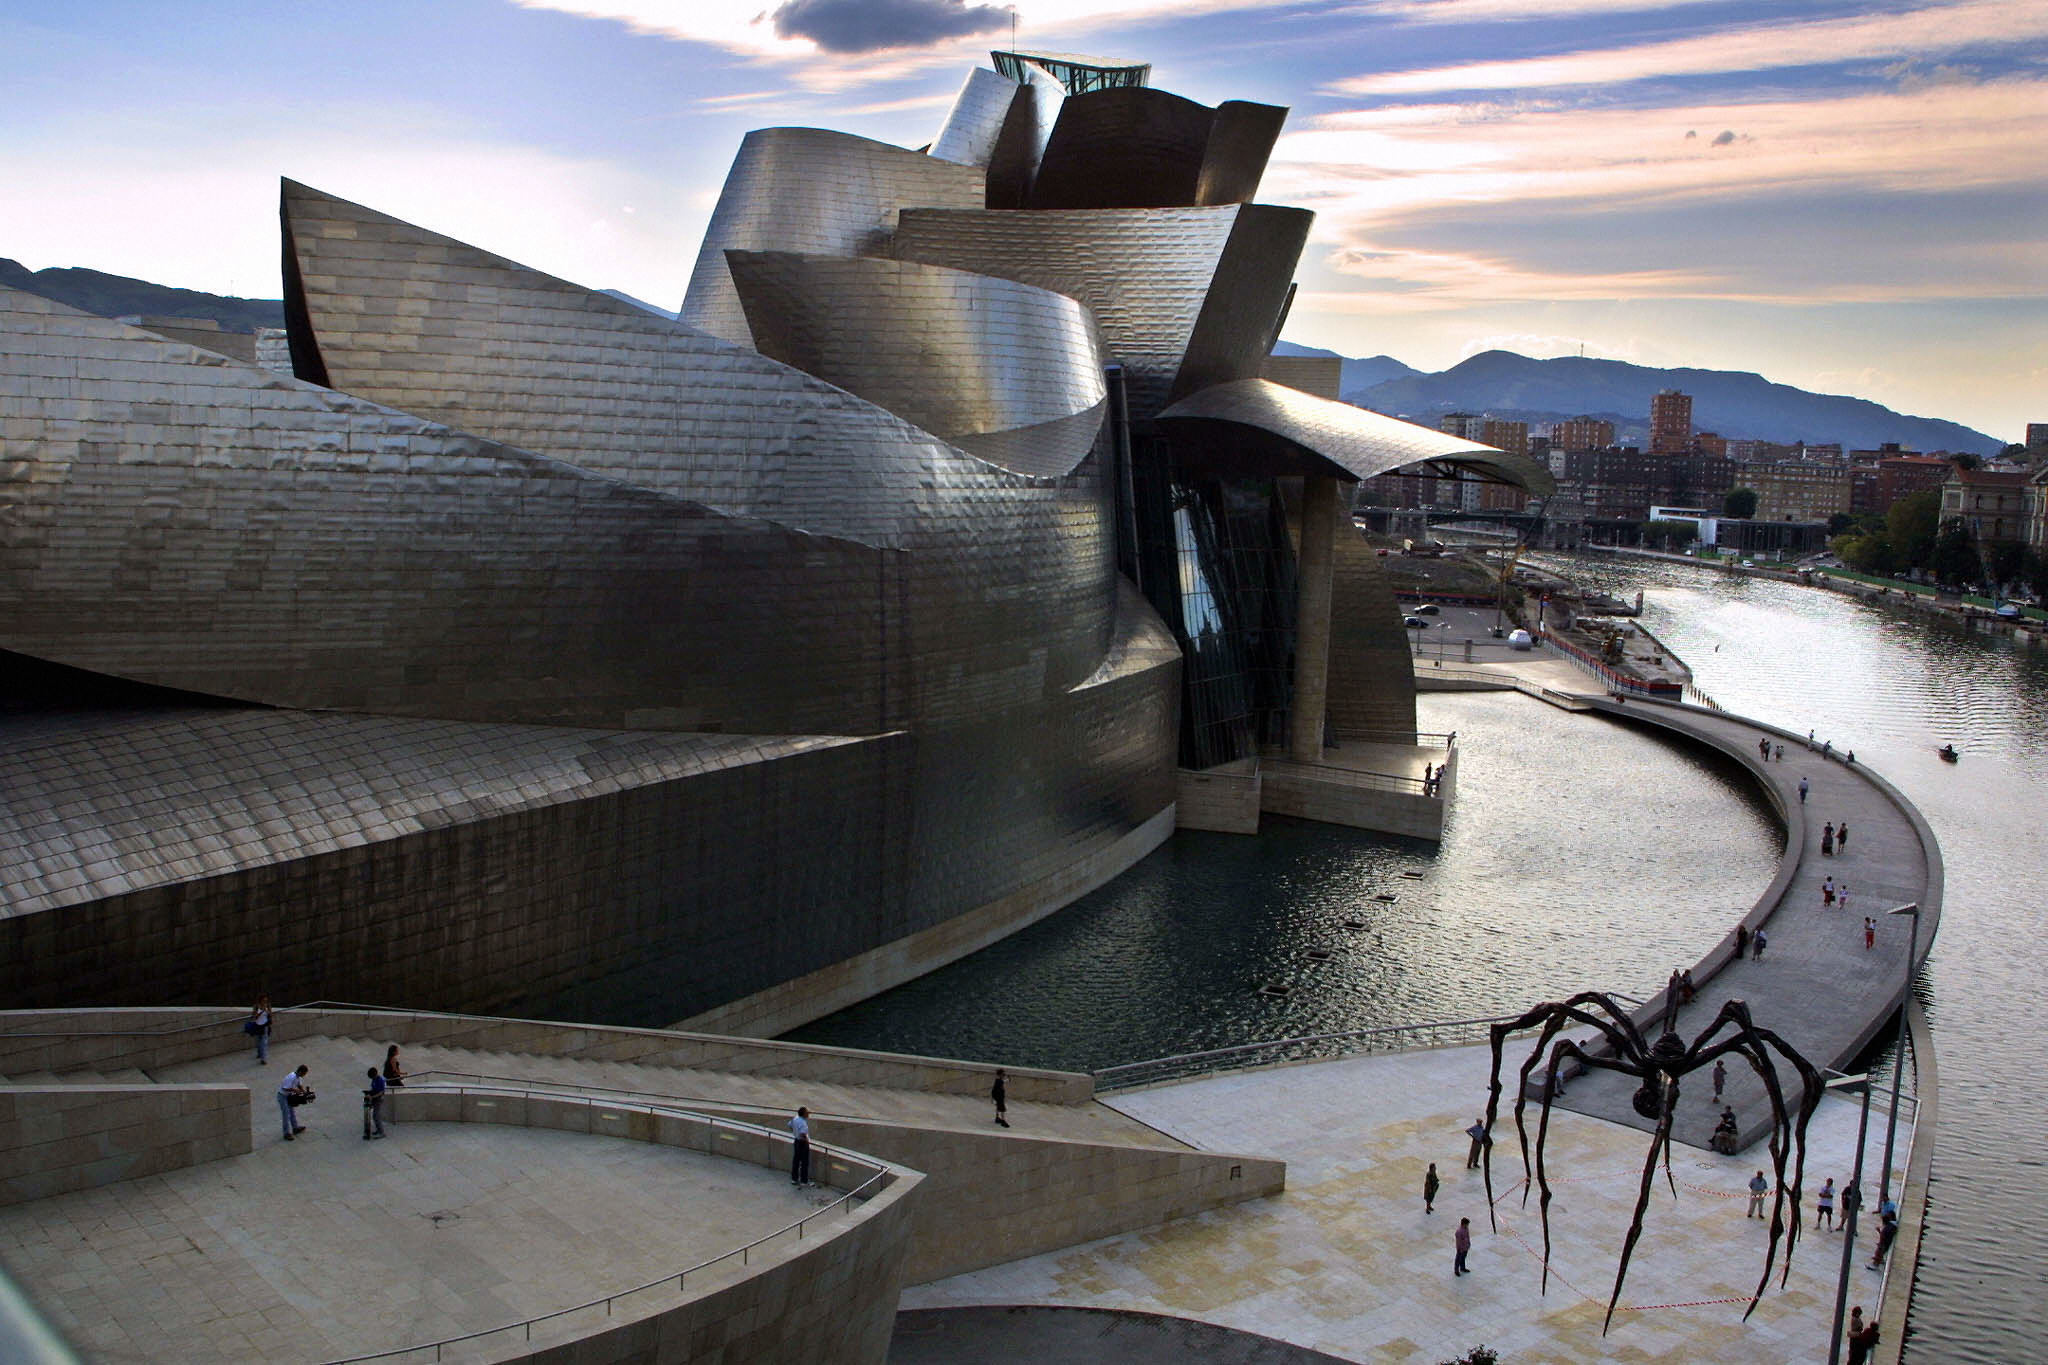 The Guggenheim Bilbao, with a spider by sculptor Louise Bourgeois.